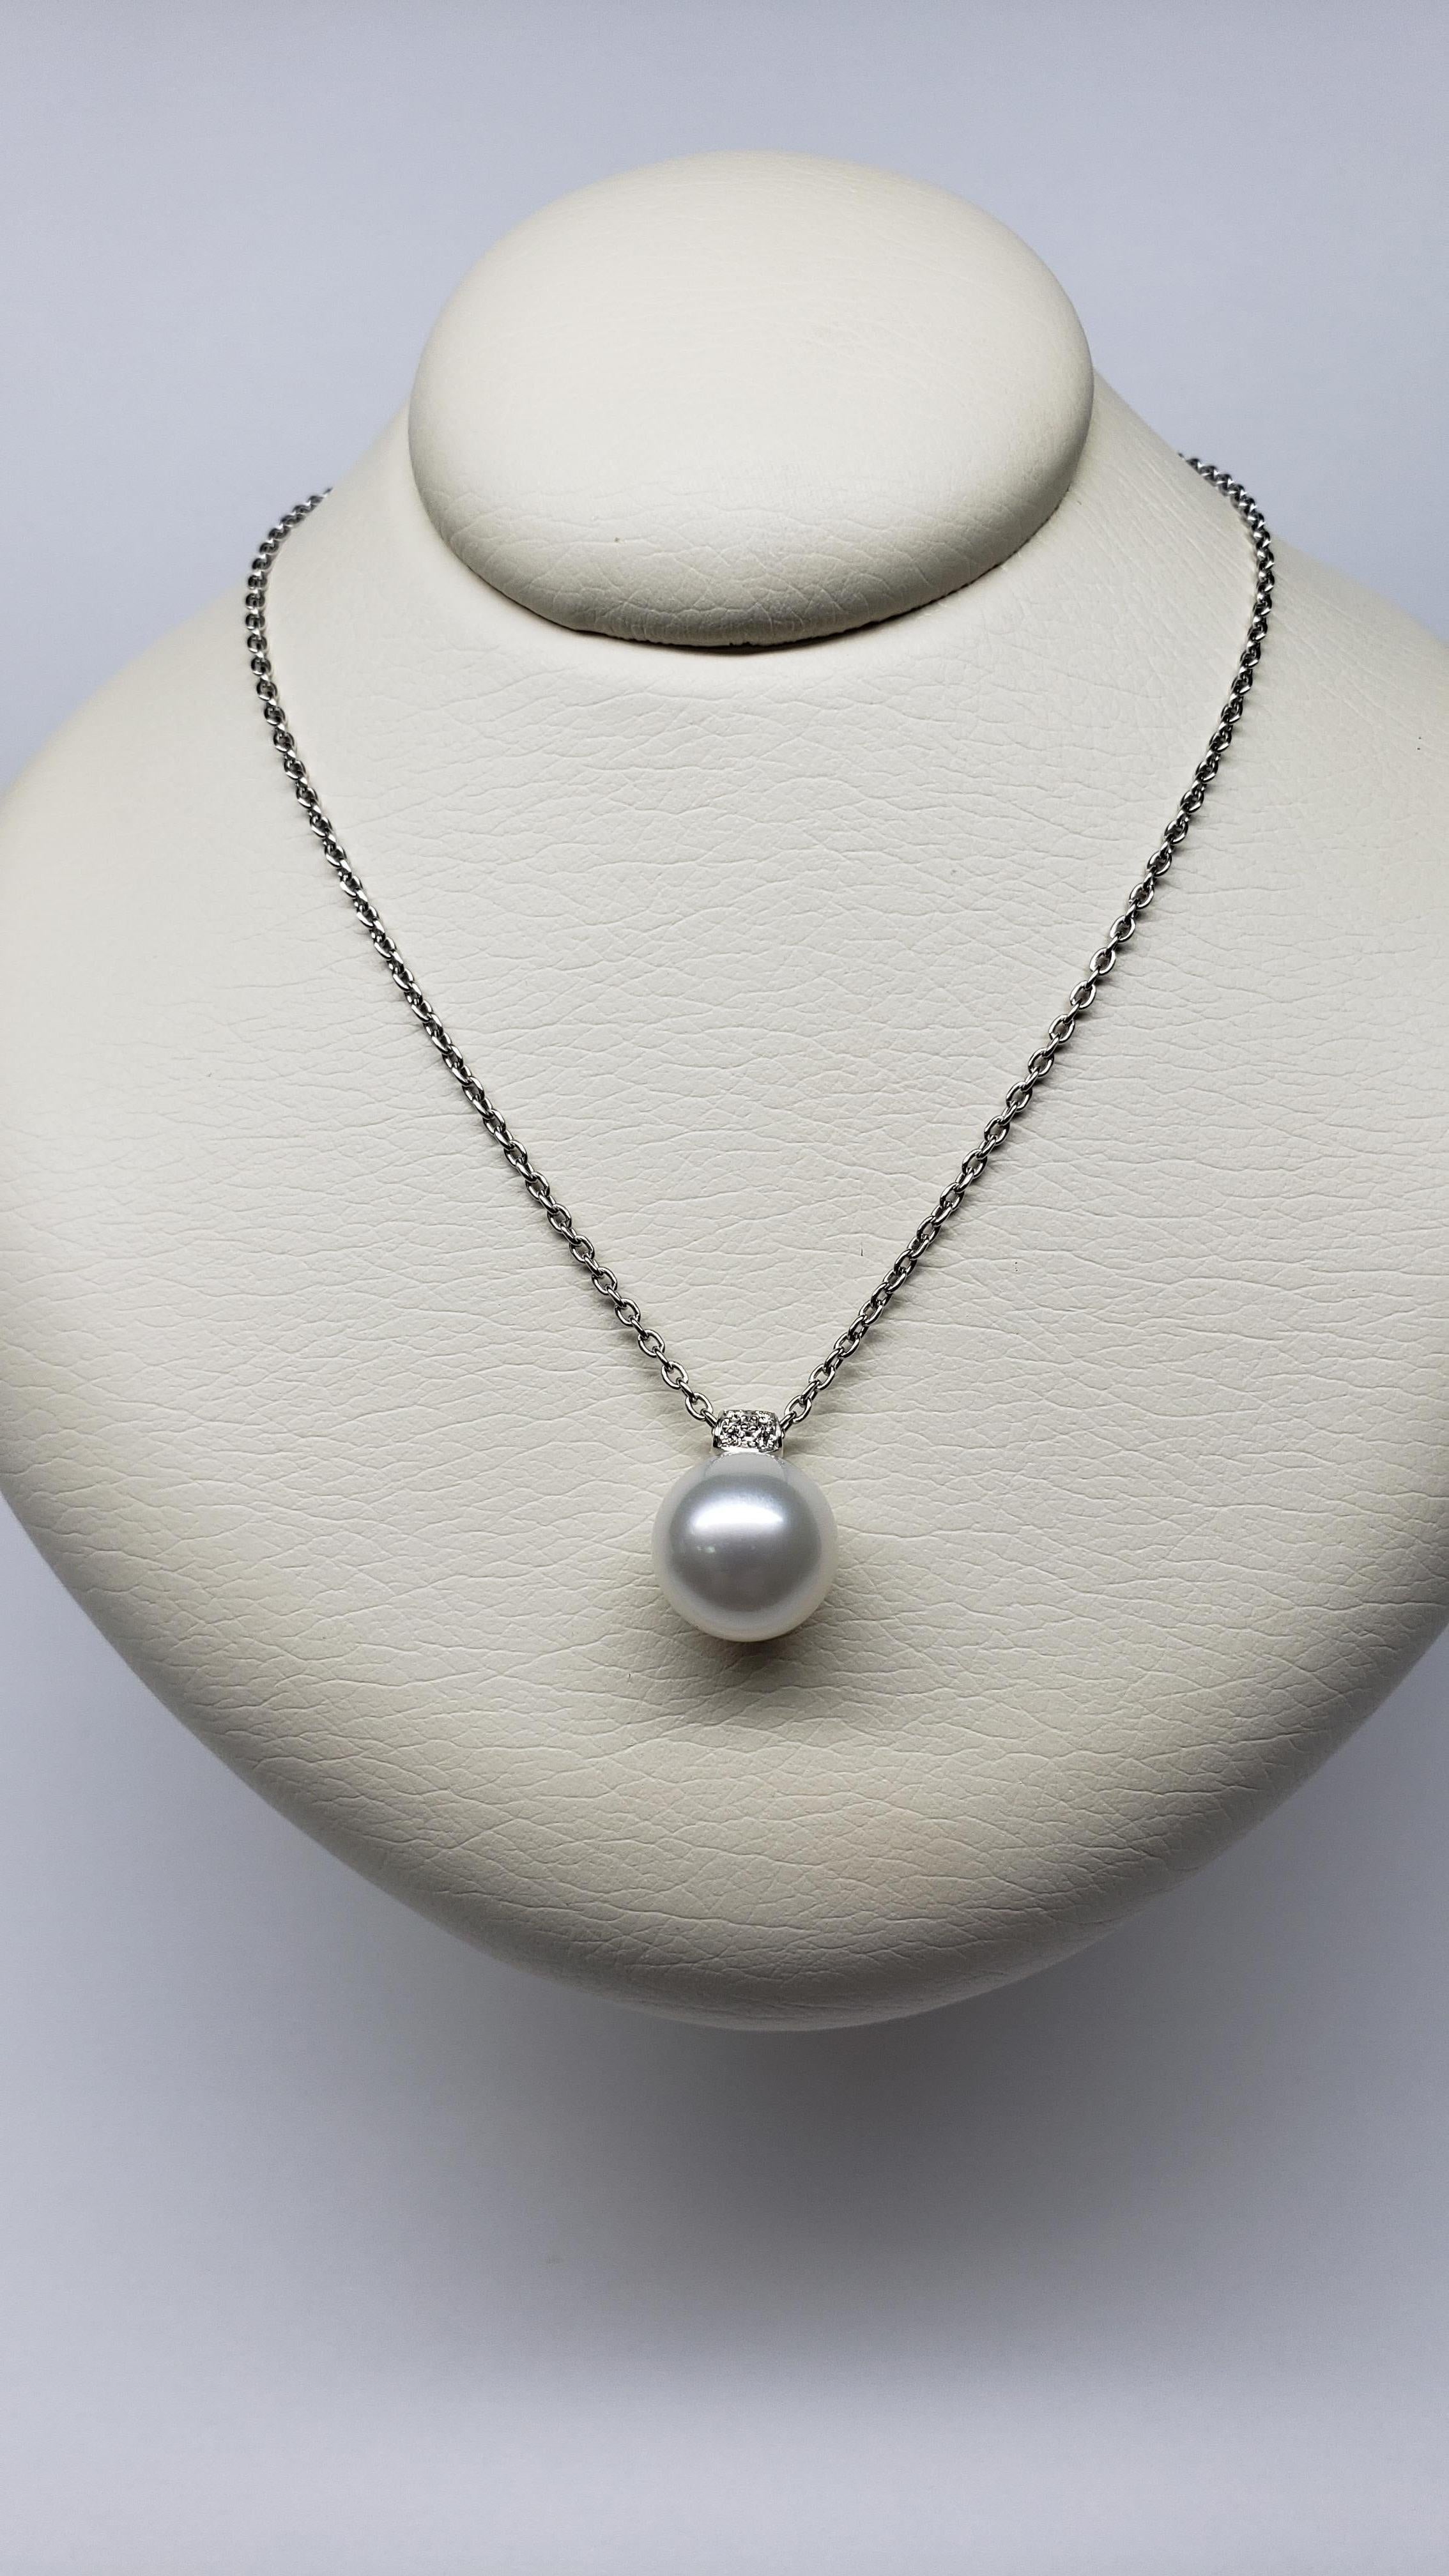 This Mikimoto, 18K, White Gold, 11mm, White South Sea Pearl Pendant features an A+ quality, cultured south sea pearl. It is adorned with an 18K white gold and diamond bale. Attached is a 31.5